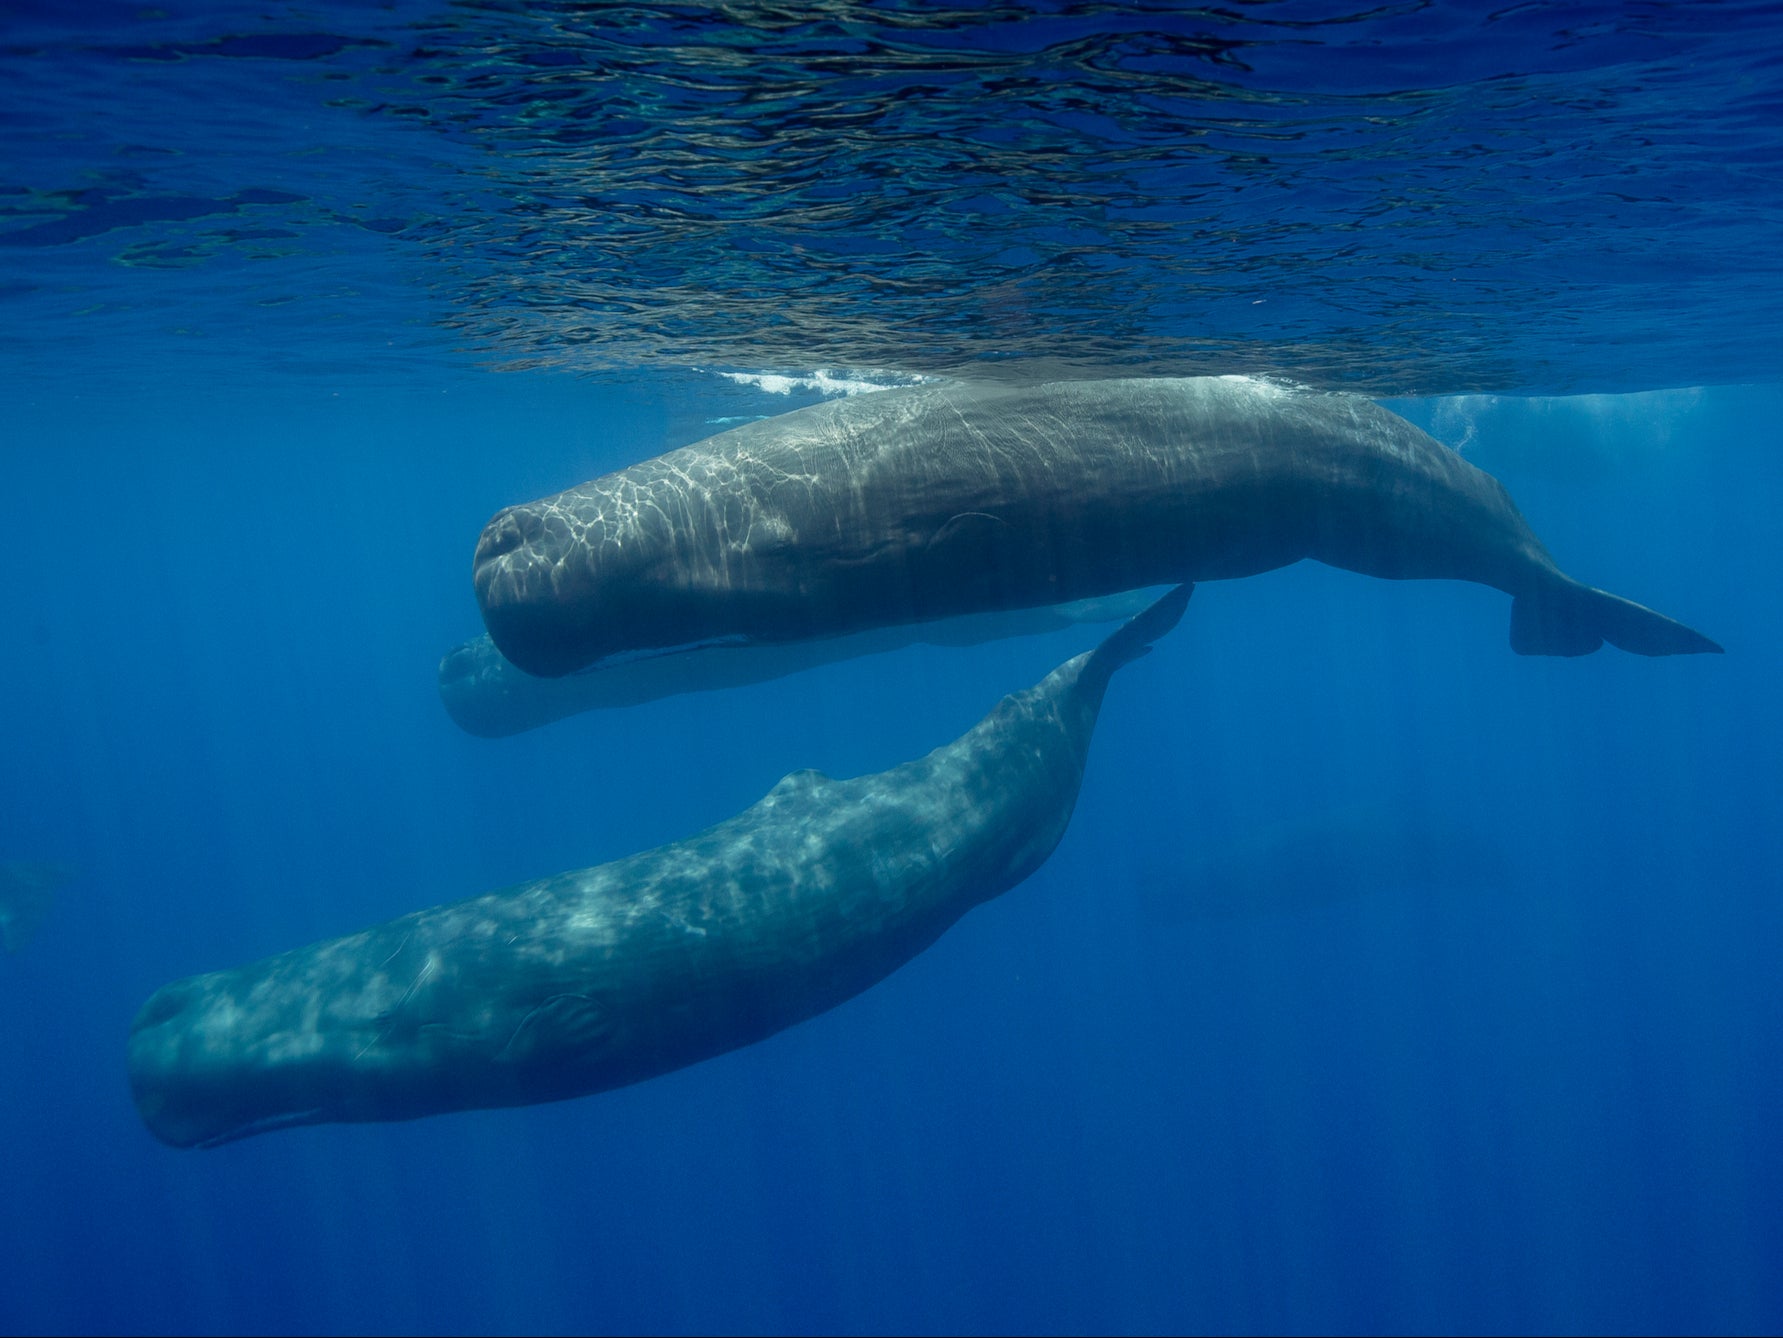 Sperm whales travel in clans and make decisions democratically, new research has found